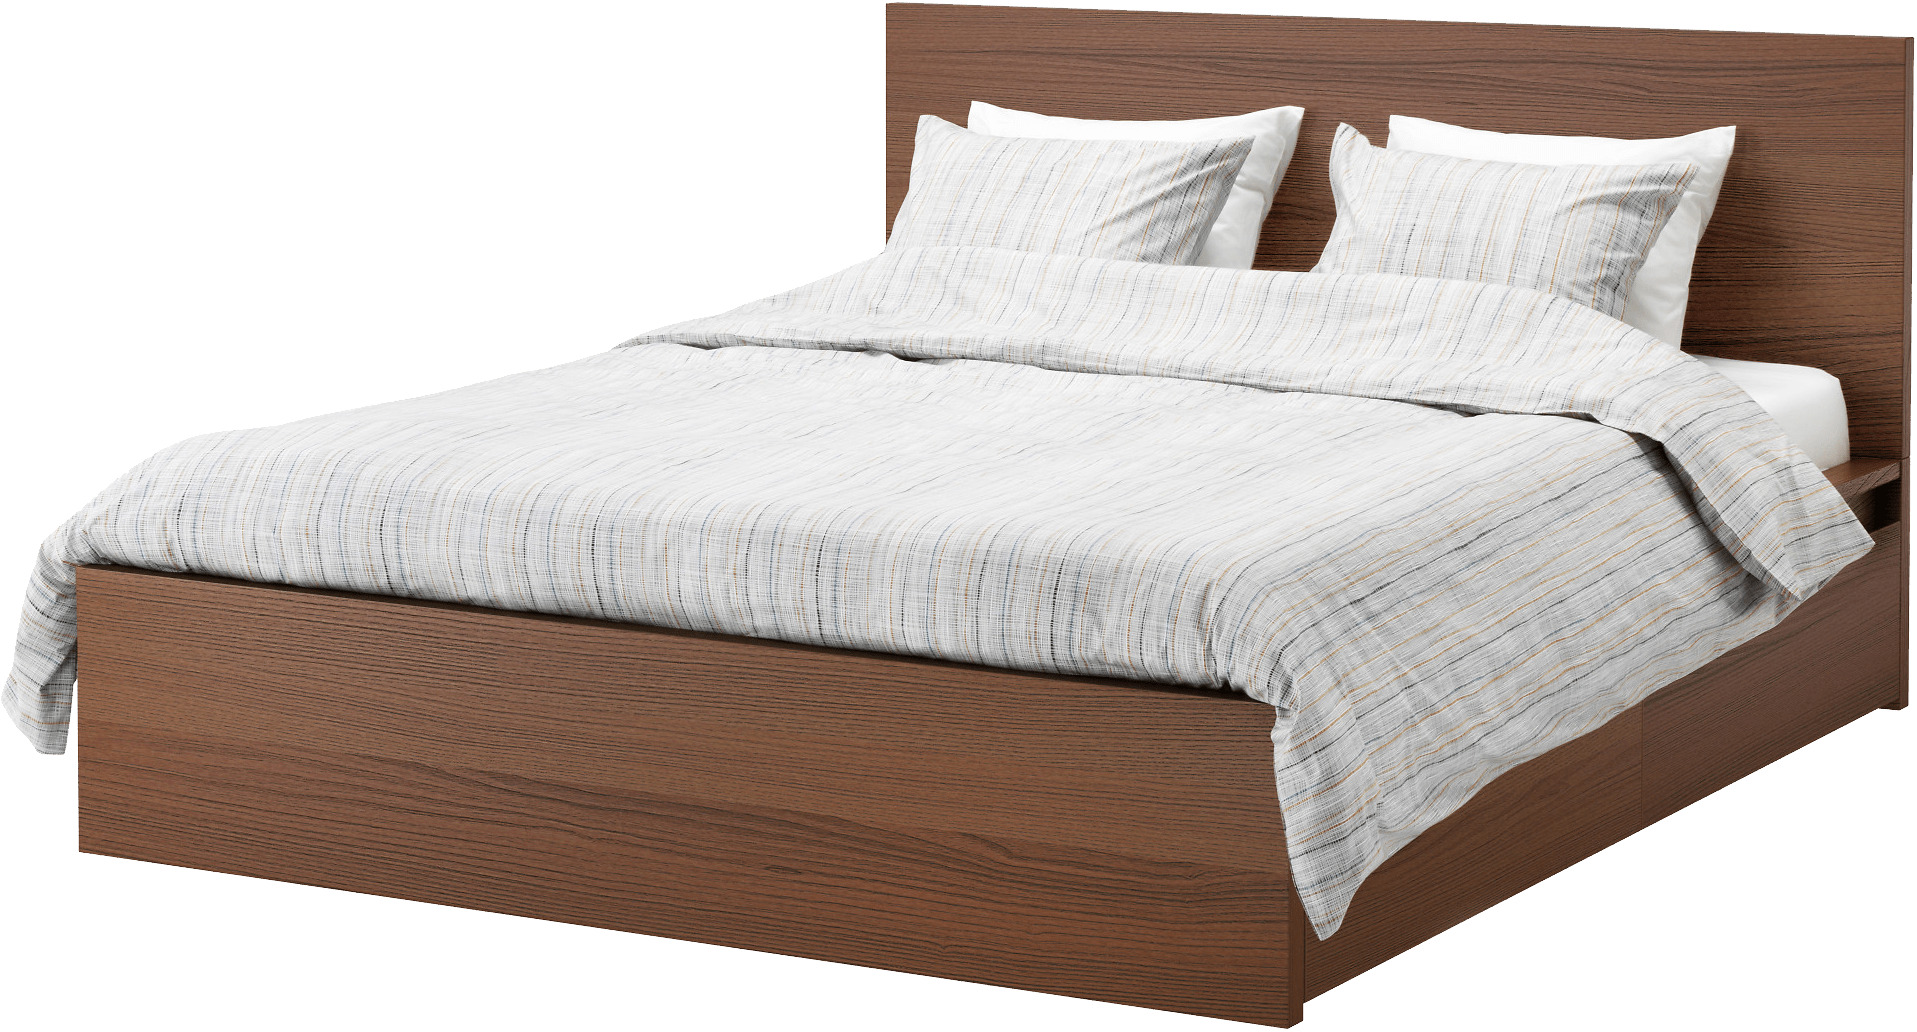 Modern Wooden Bed png icons